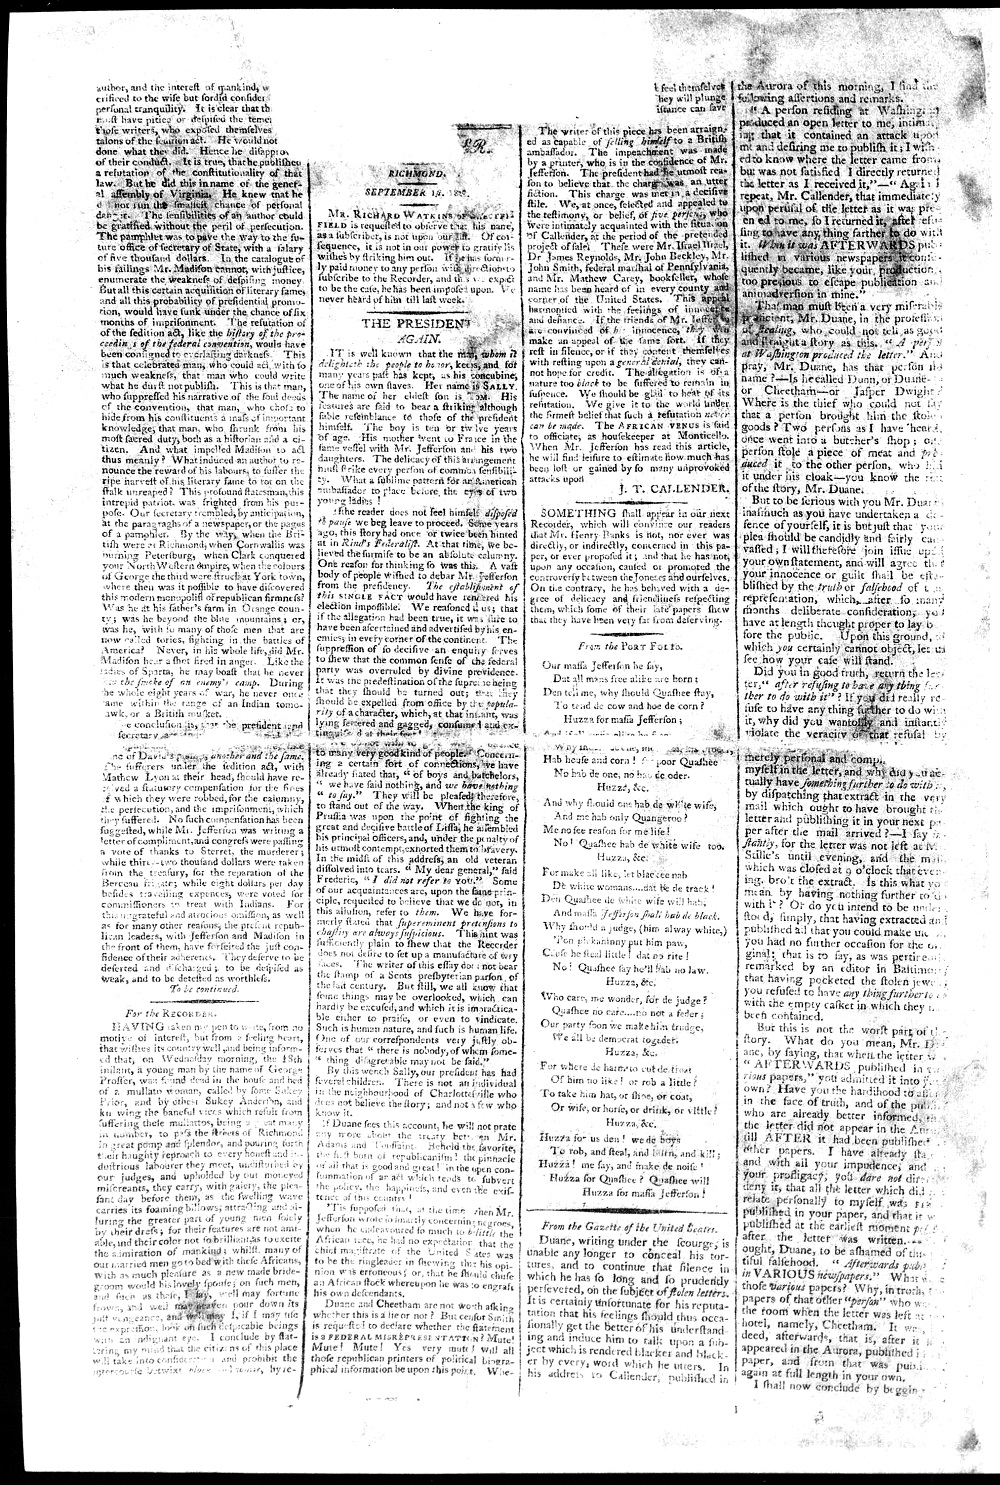 Four-column page of the September 1, 1802, Richmond newspaper The Recorder featuring the article “The President Again” by James T. Callender.